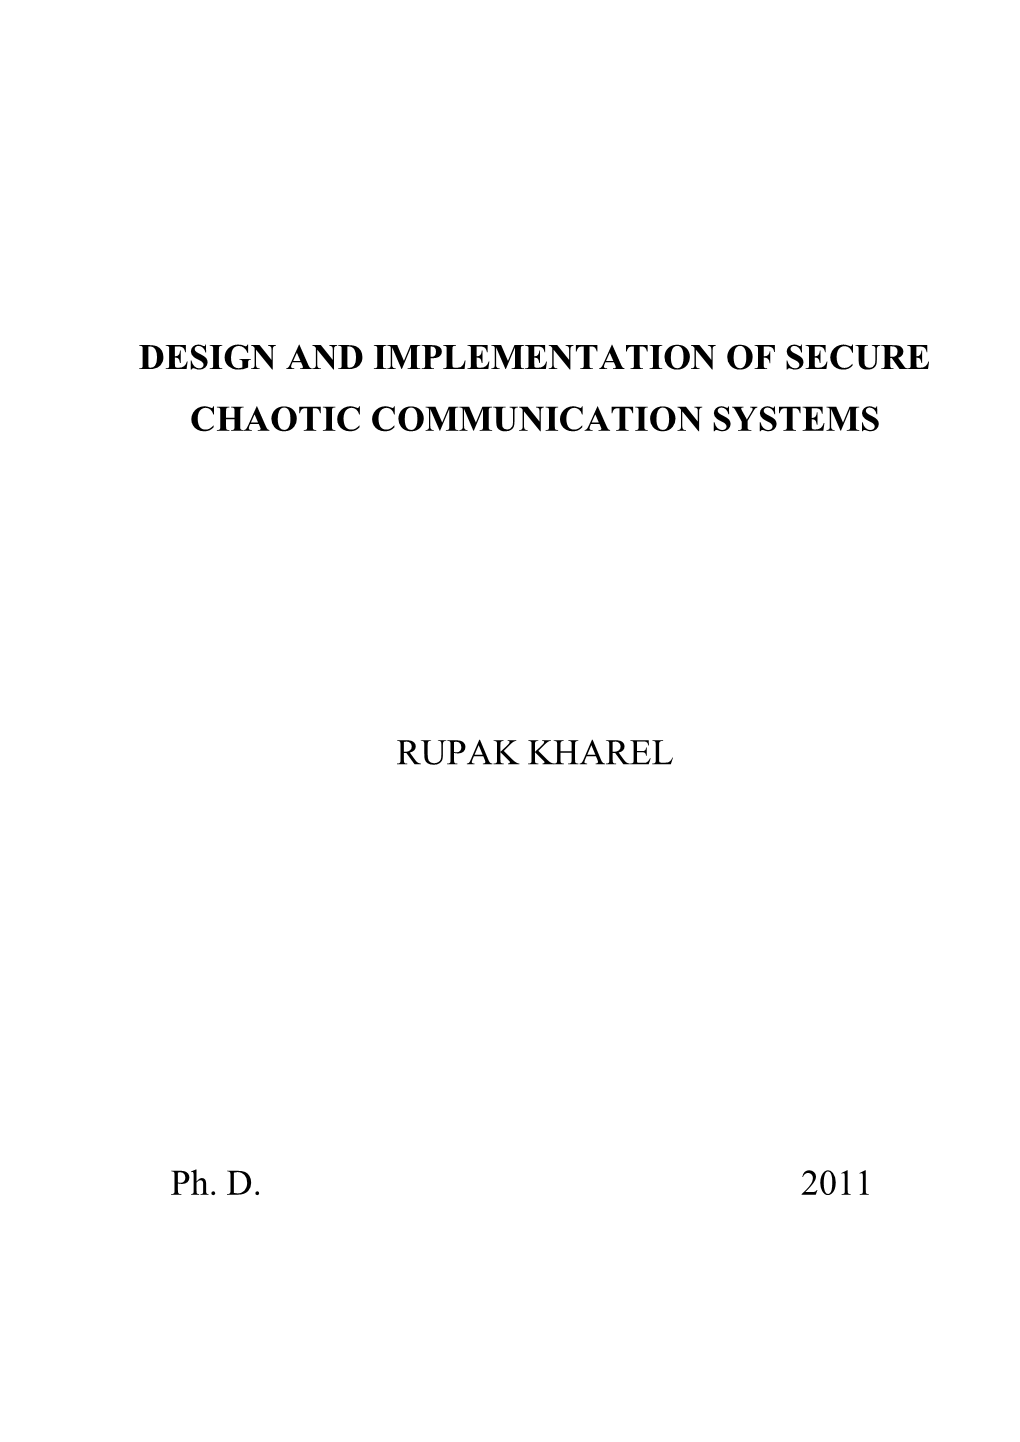 Design and Implementation of Secure Chaotic Communication Systems